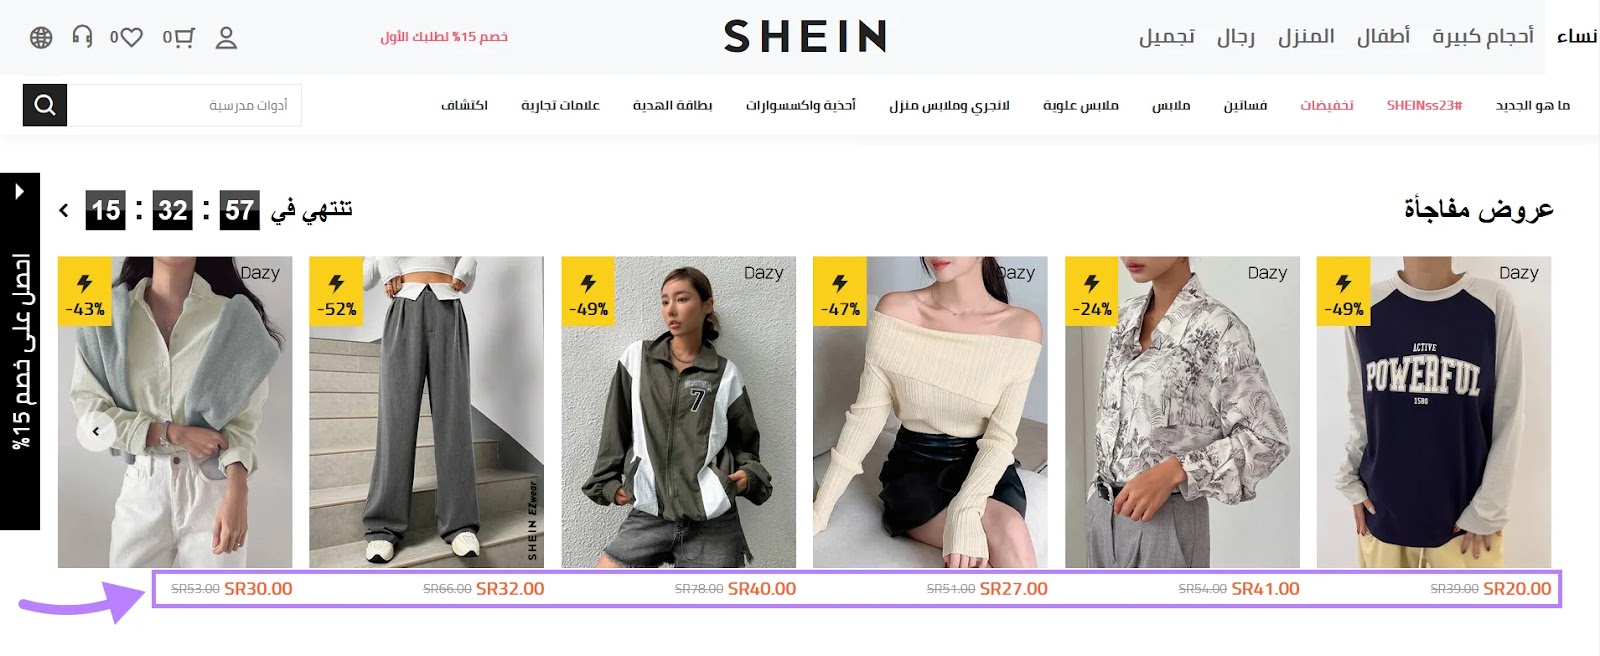 Shein's website for the Saudi market